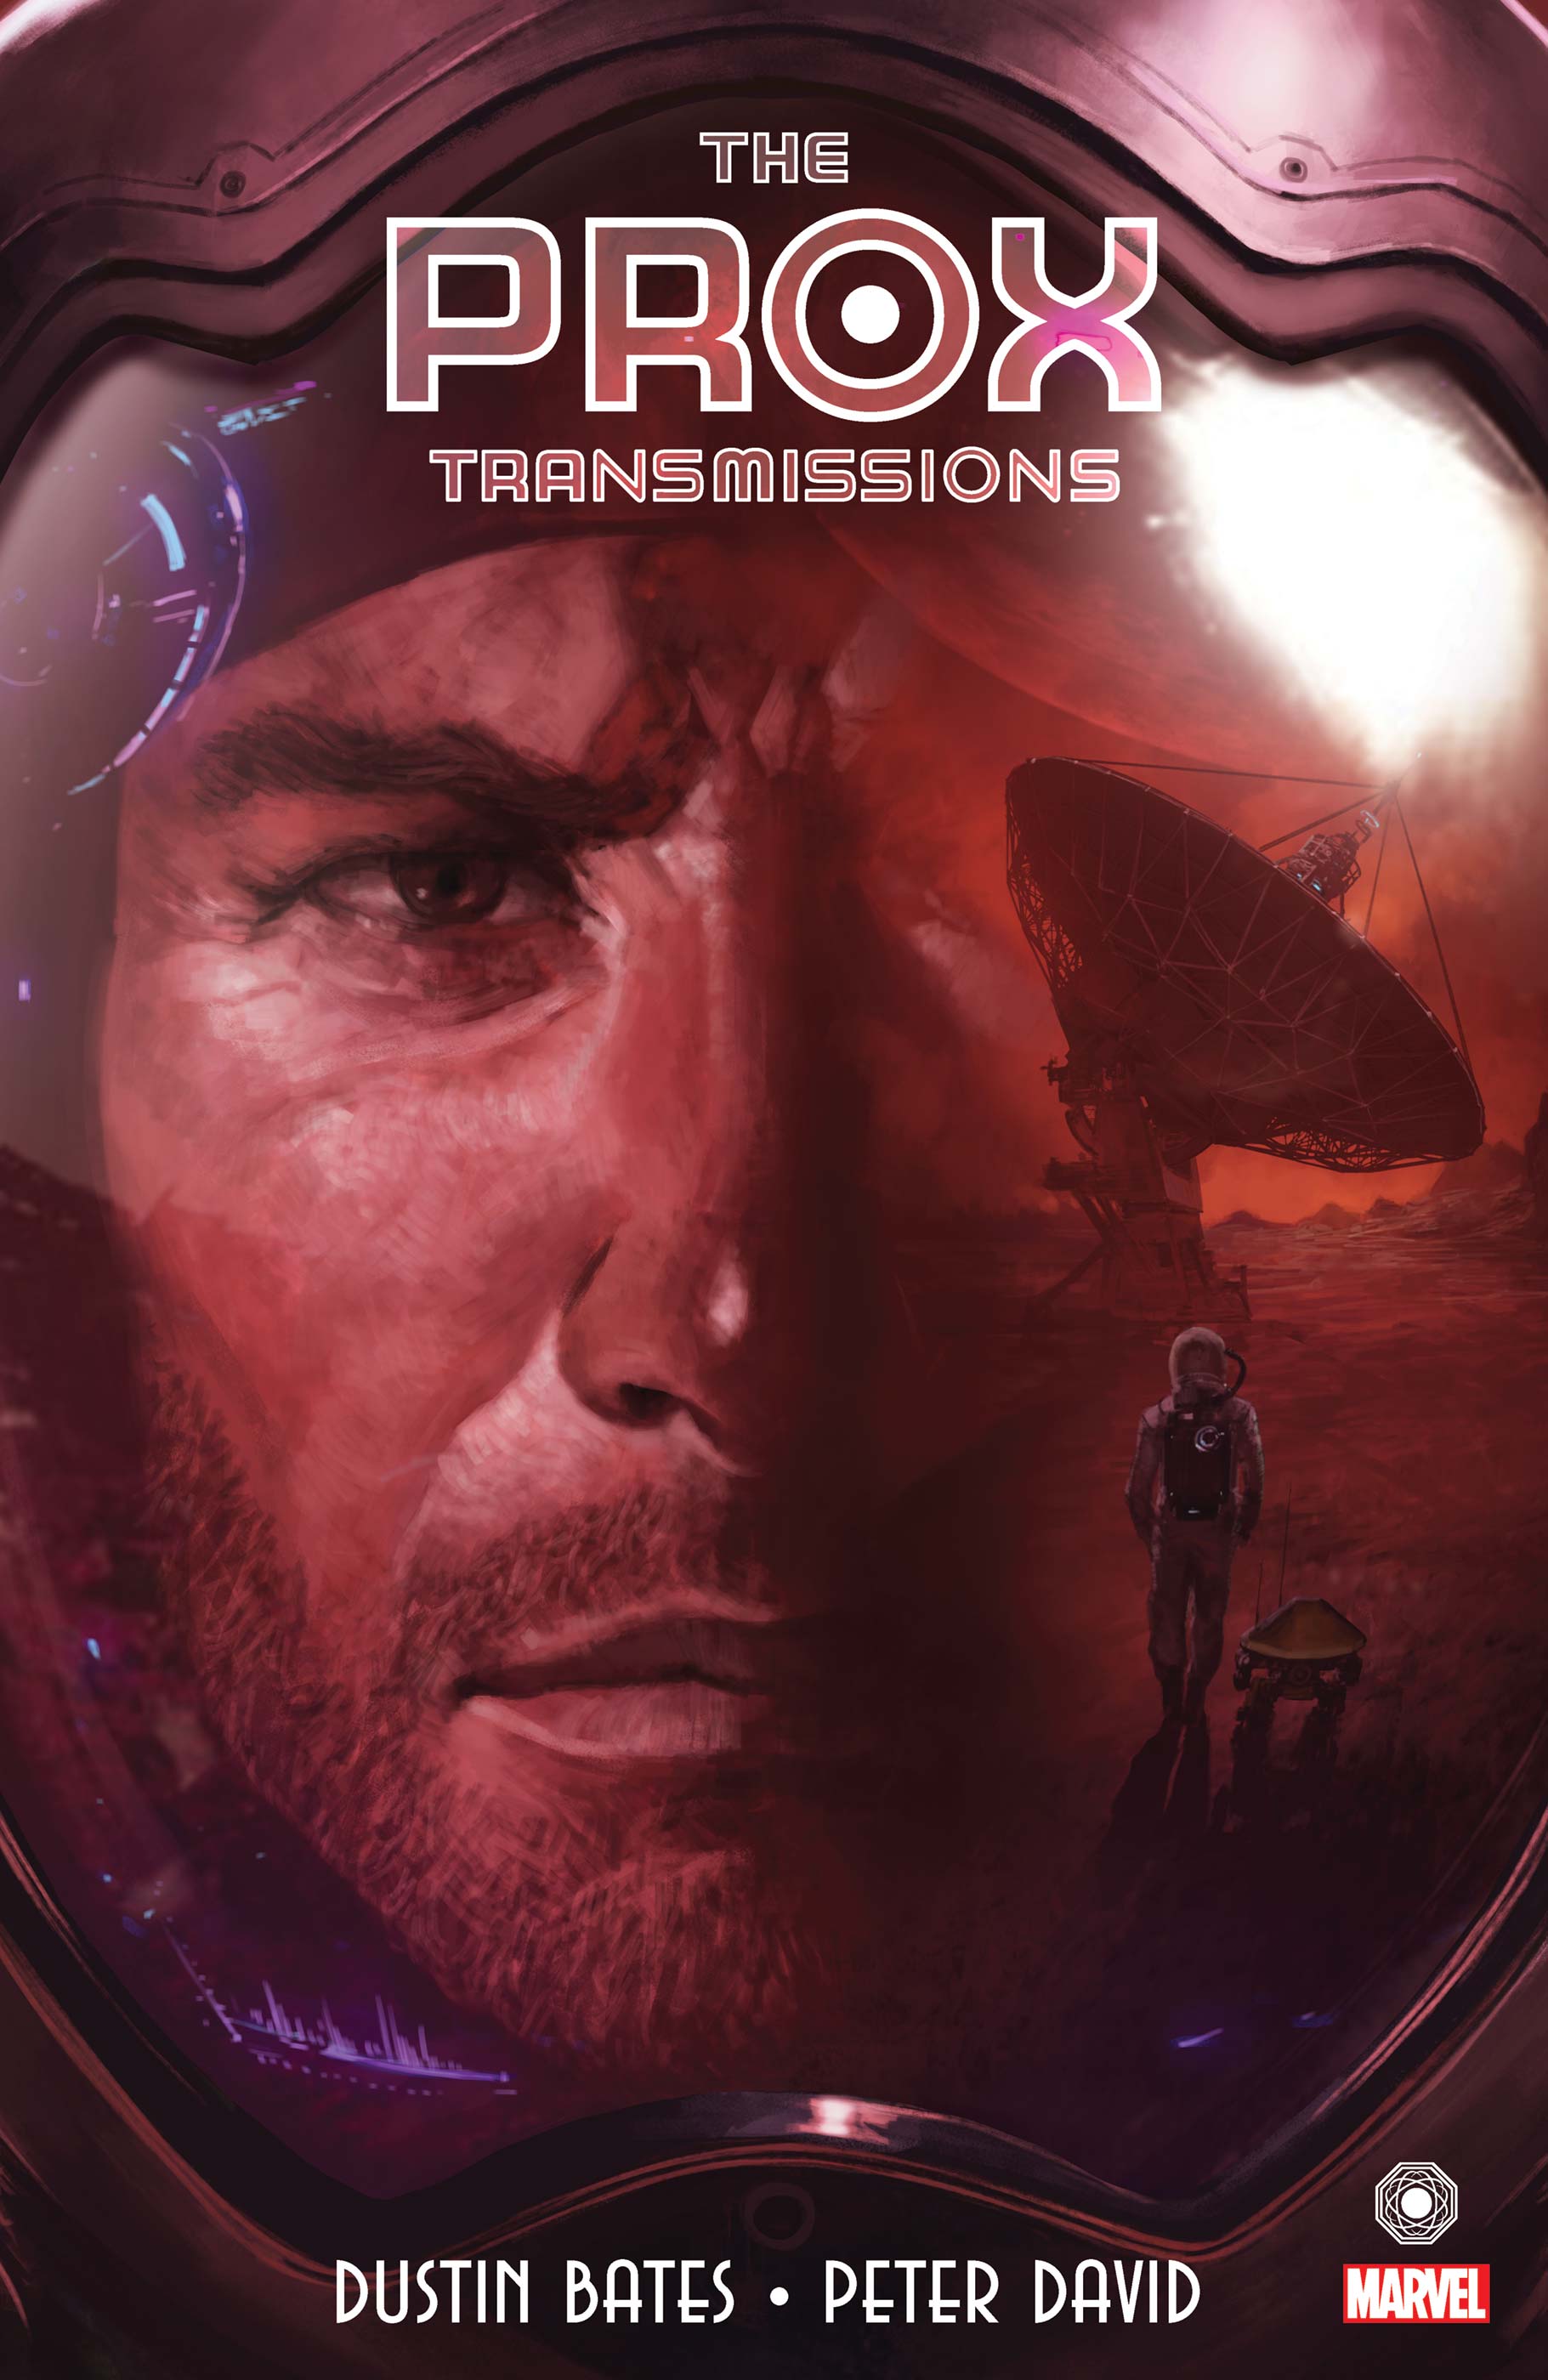 THE PROX TRANSMISSIONS TPB (Trade Paperback)